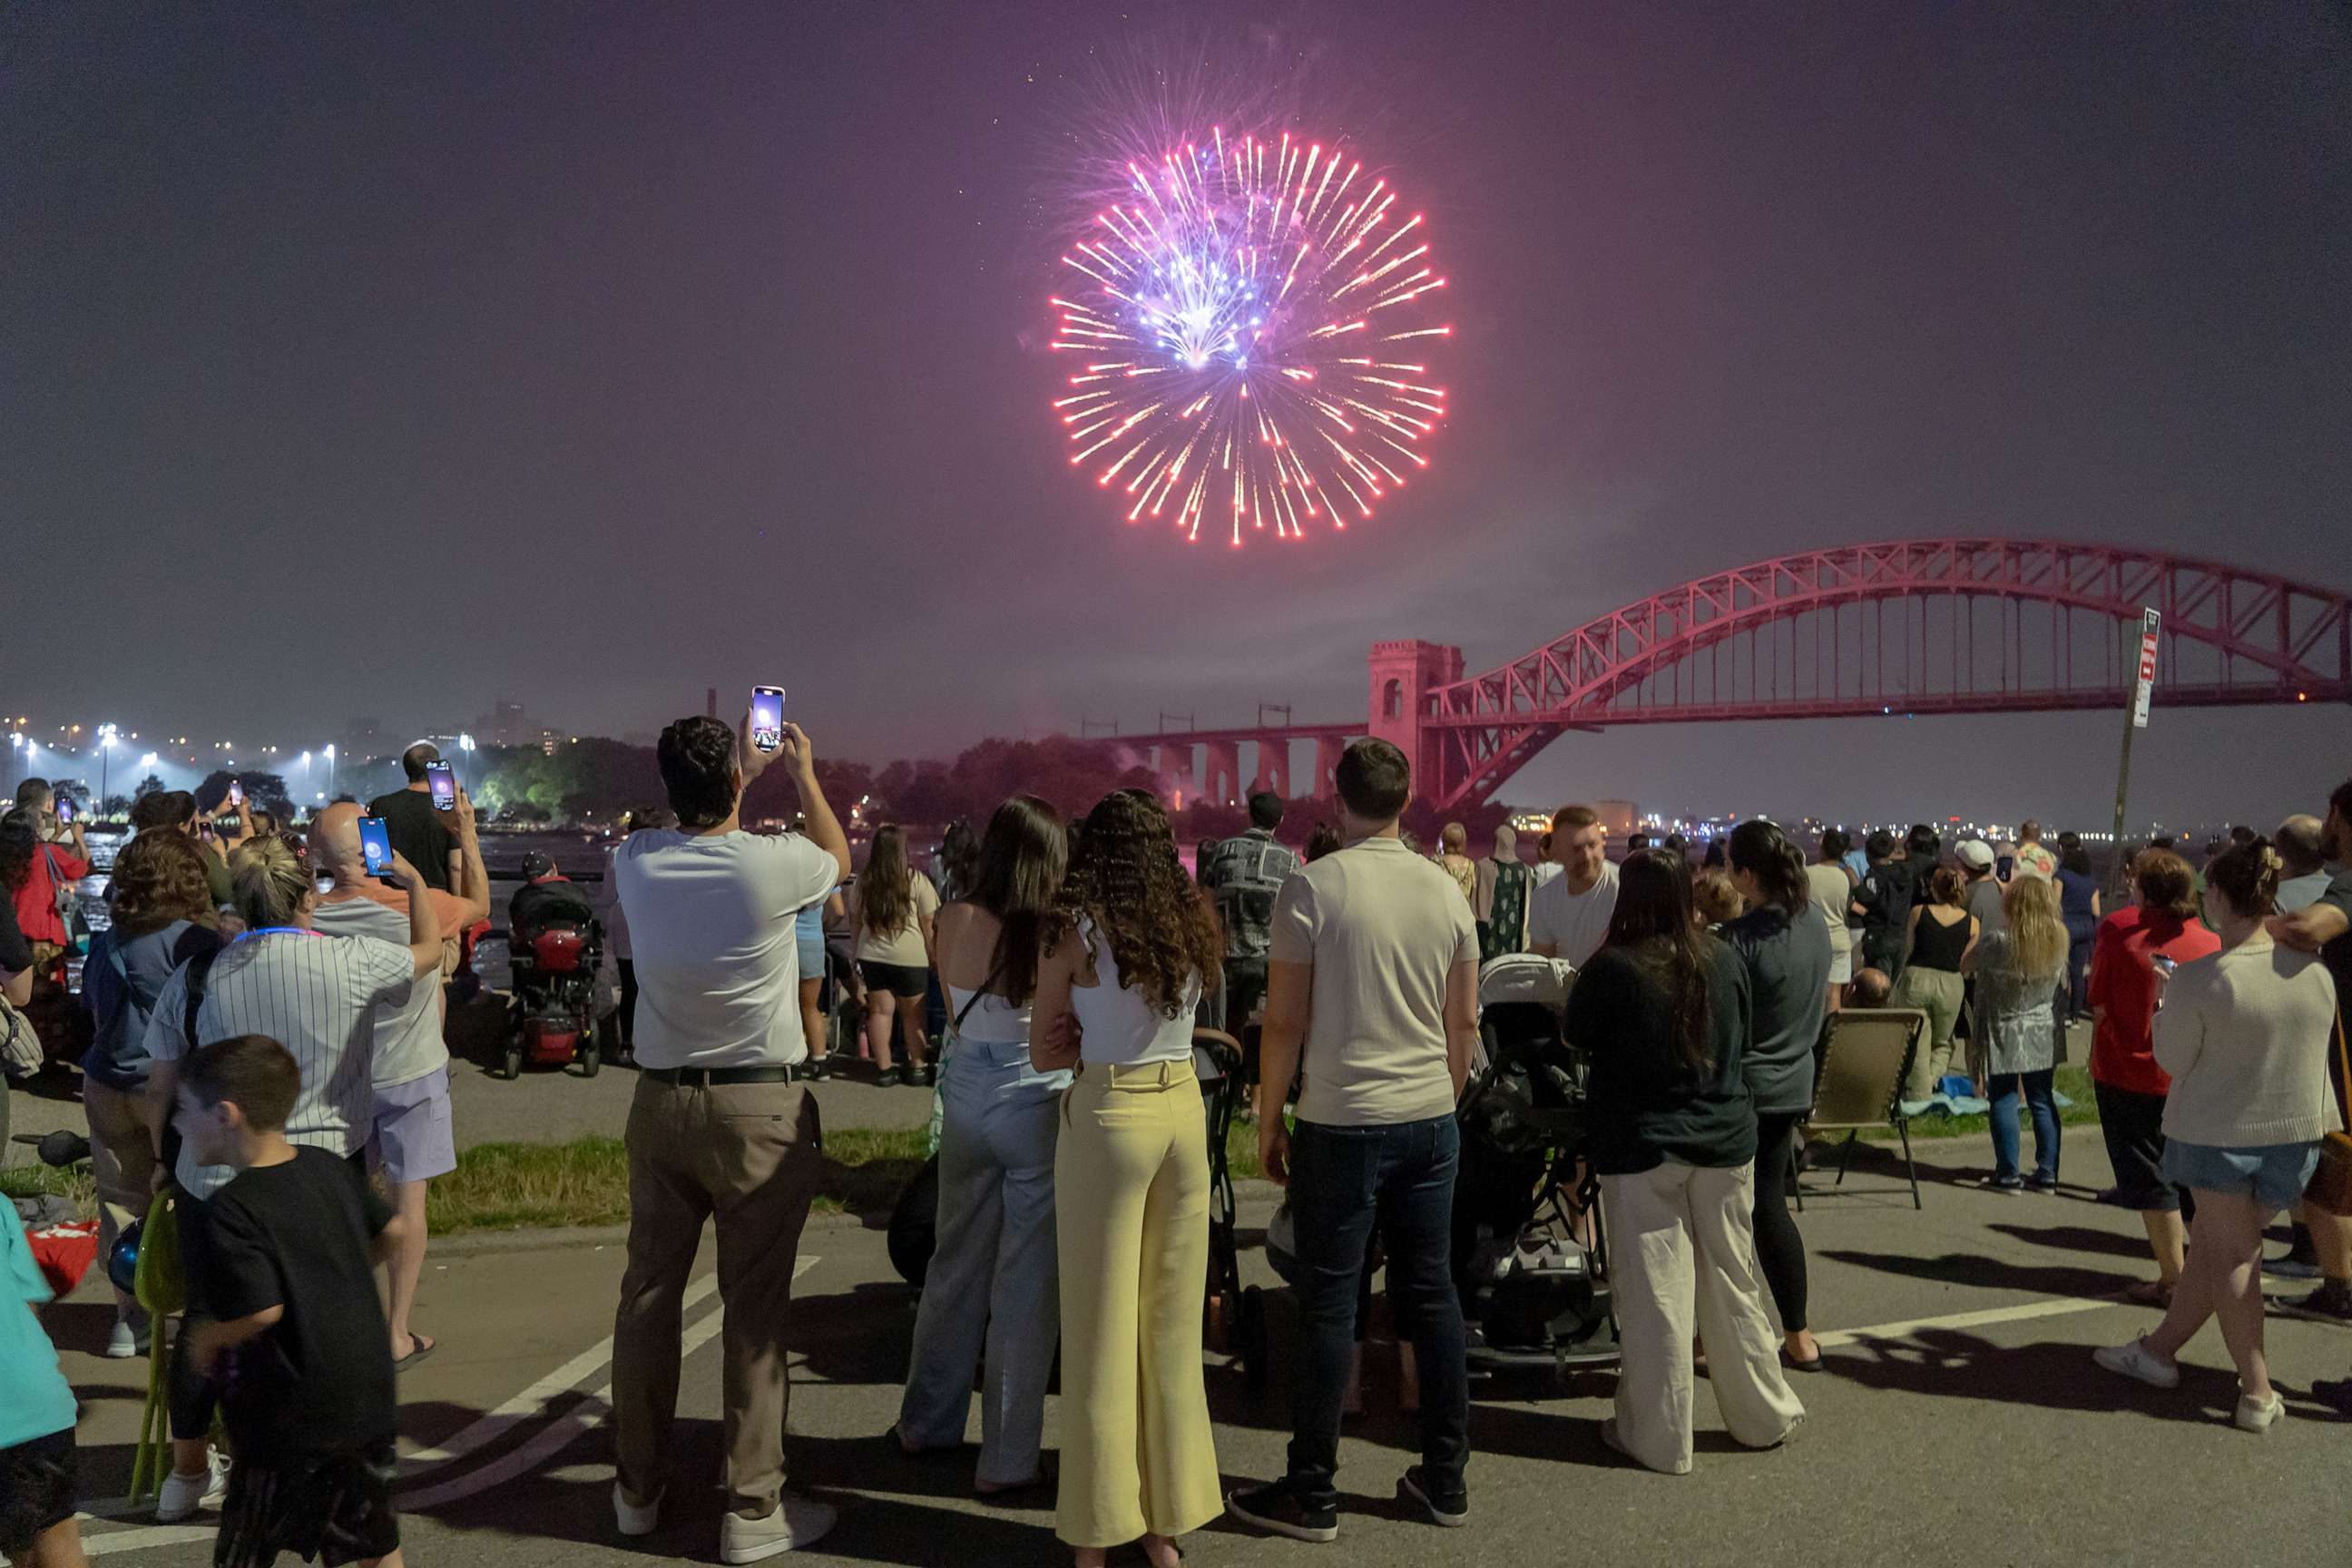 PHOTO: Spectators watch fireworks explode during the Central Astoria annual Independence Day Celebrations fireworks display in Astoria Park on June 29, 2023, in New York.